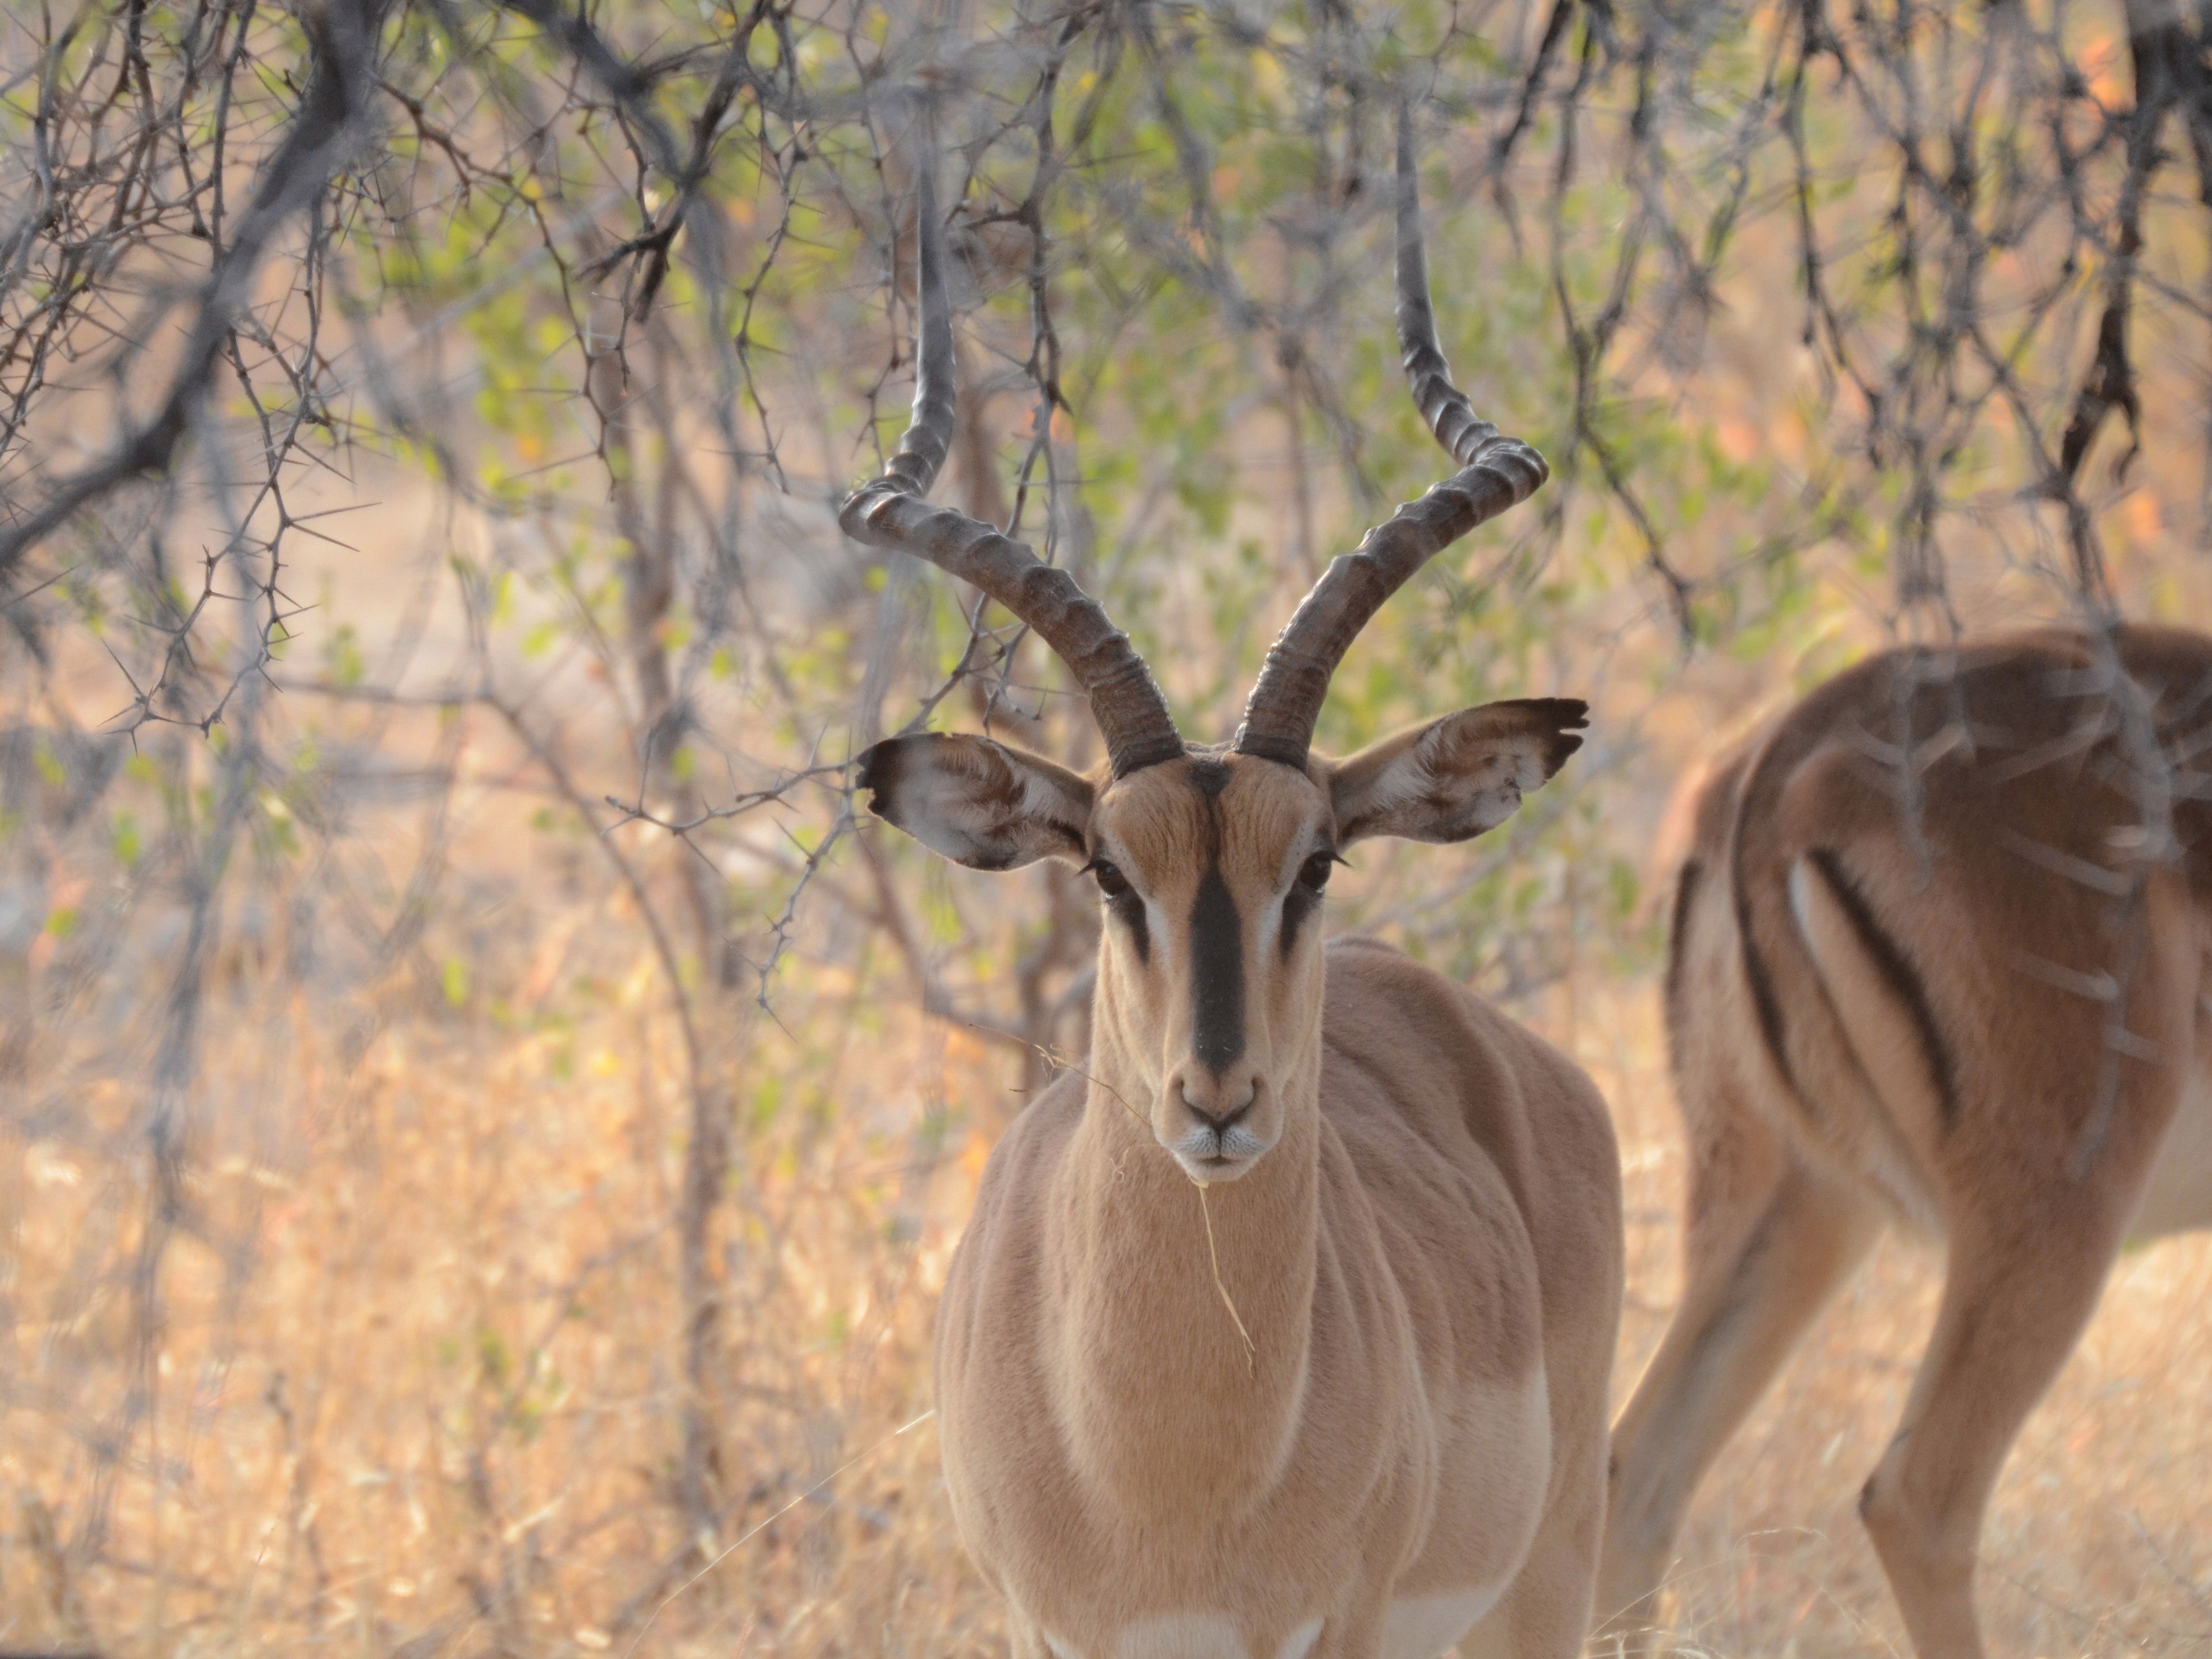 Click picture to see more Black-faced Impalas.